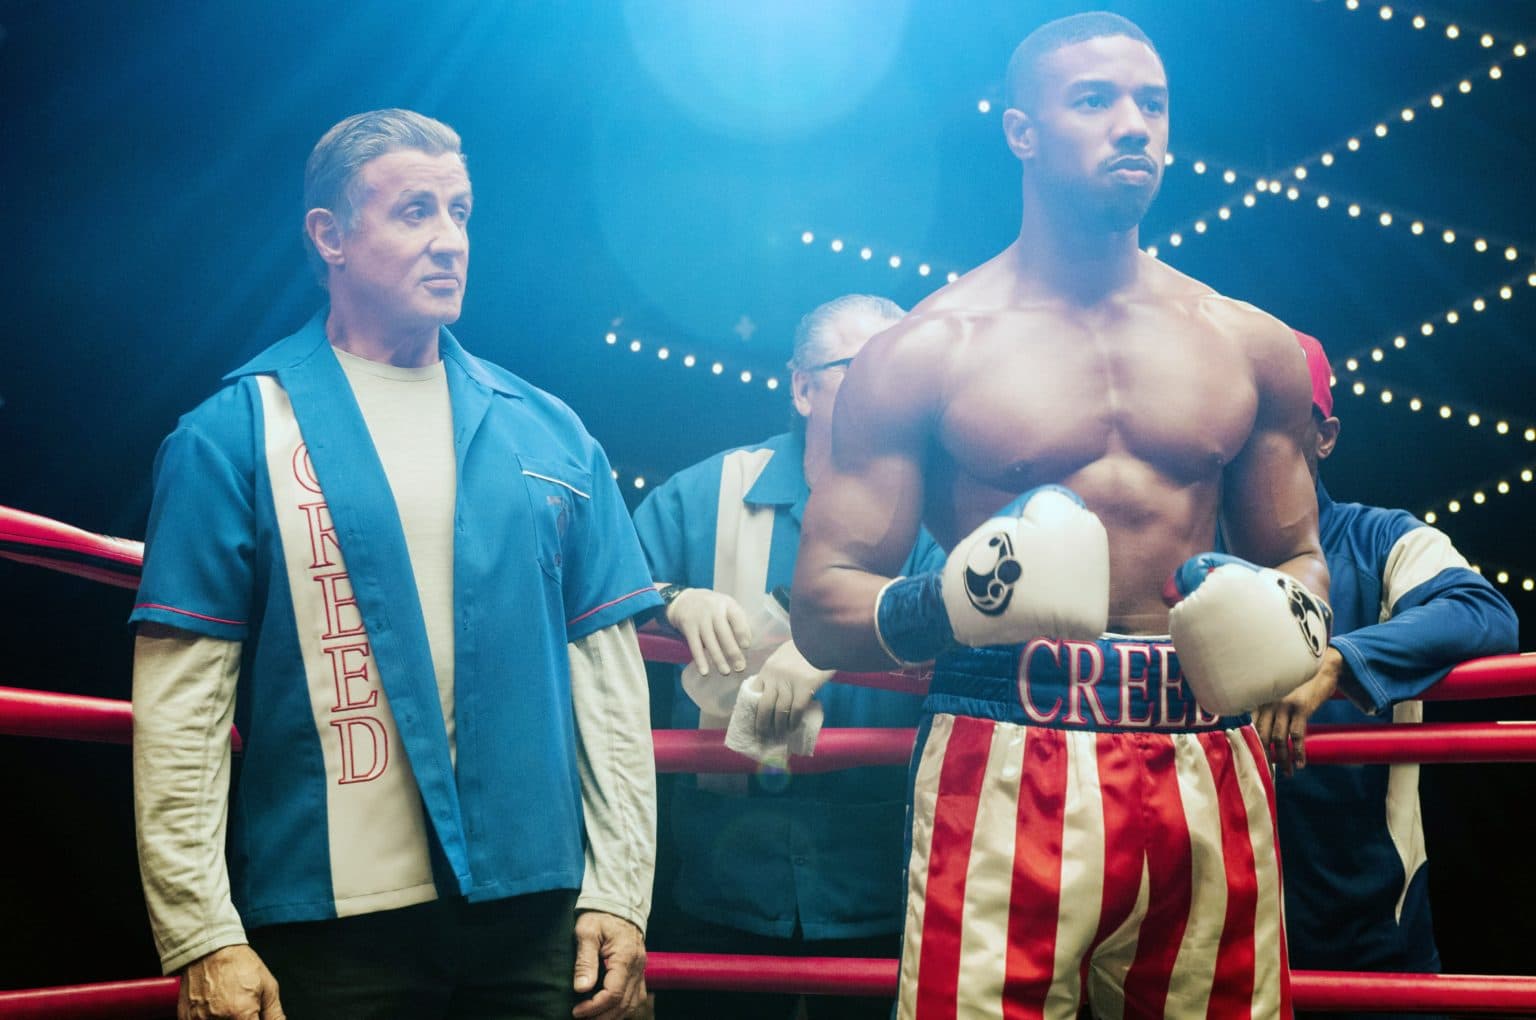 Actor Sylvester Stallone Will Not Appear In 'Creed III'